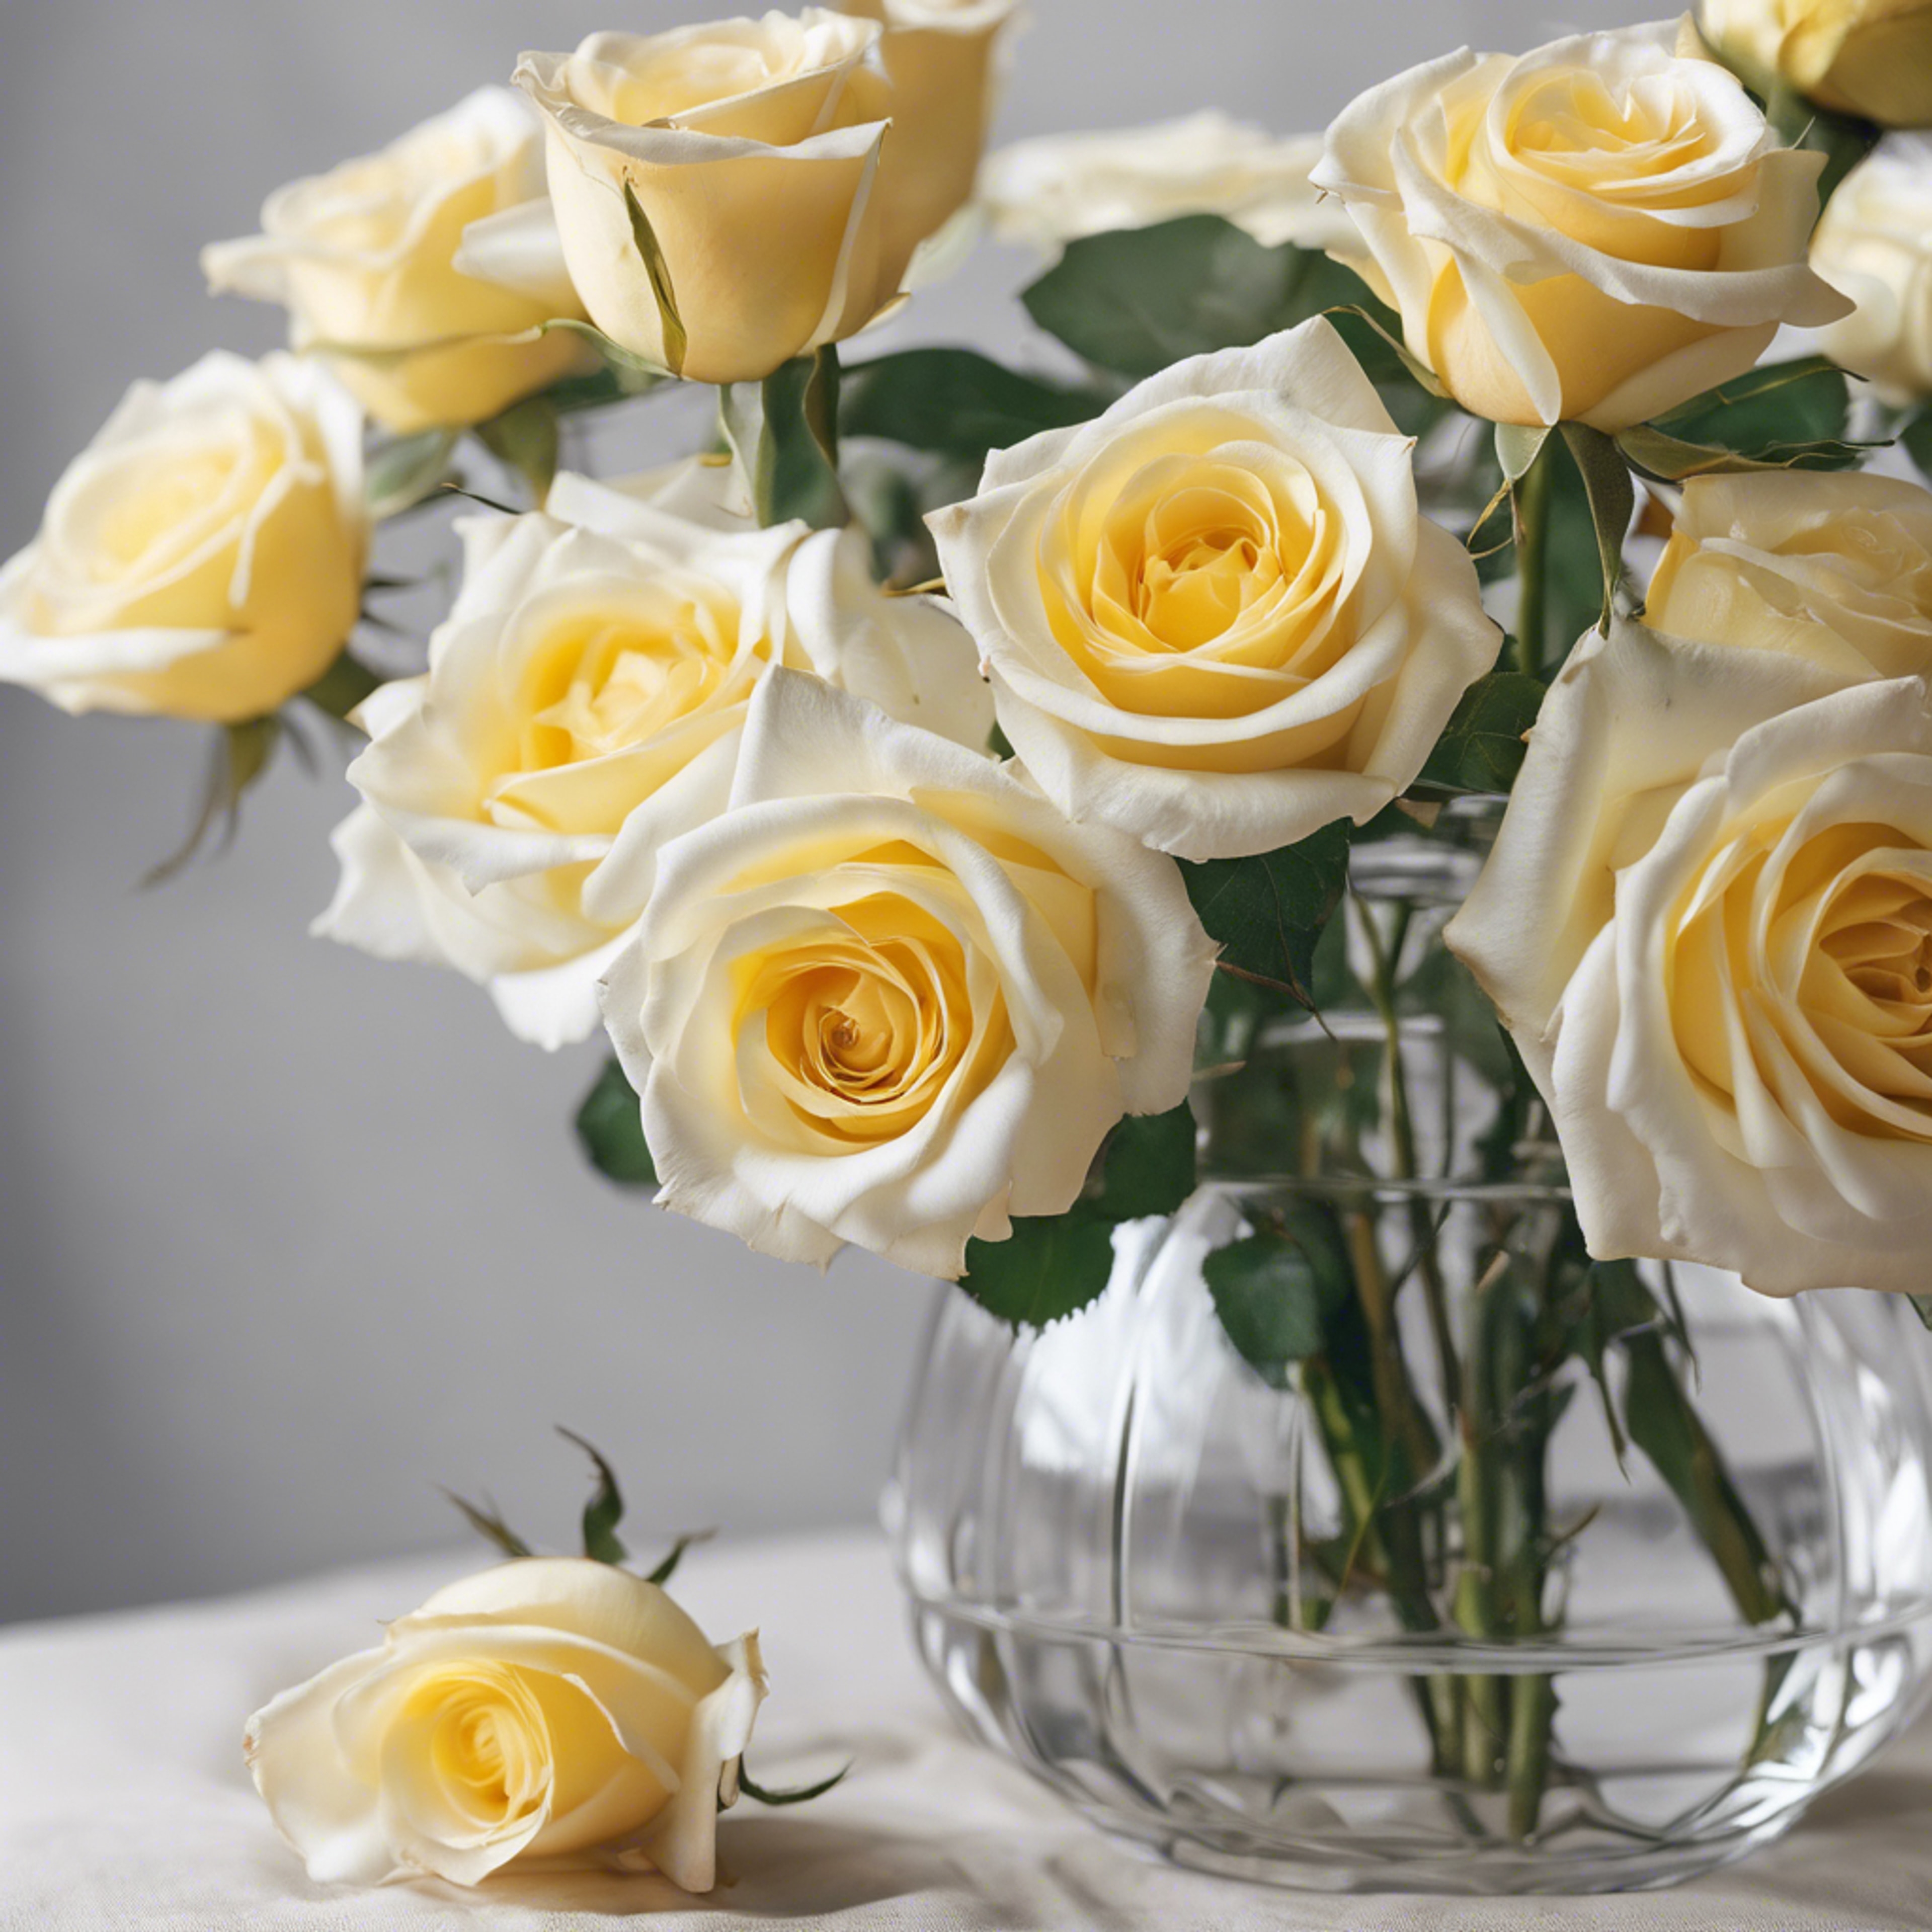 A beautiful array of luminescent white and yellow roses in a crystal clear vase. Тапет[29c0e485a0b1412795b9]